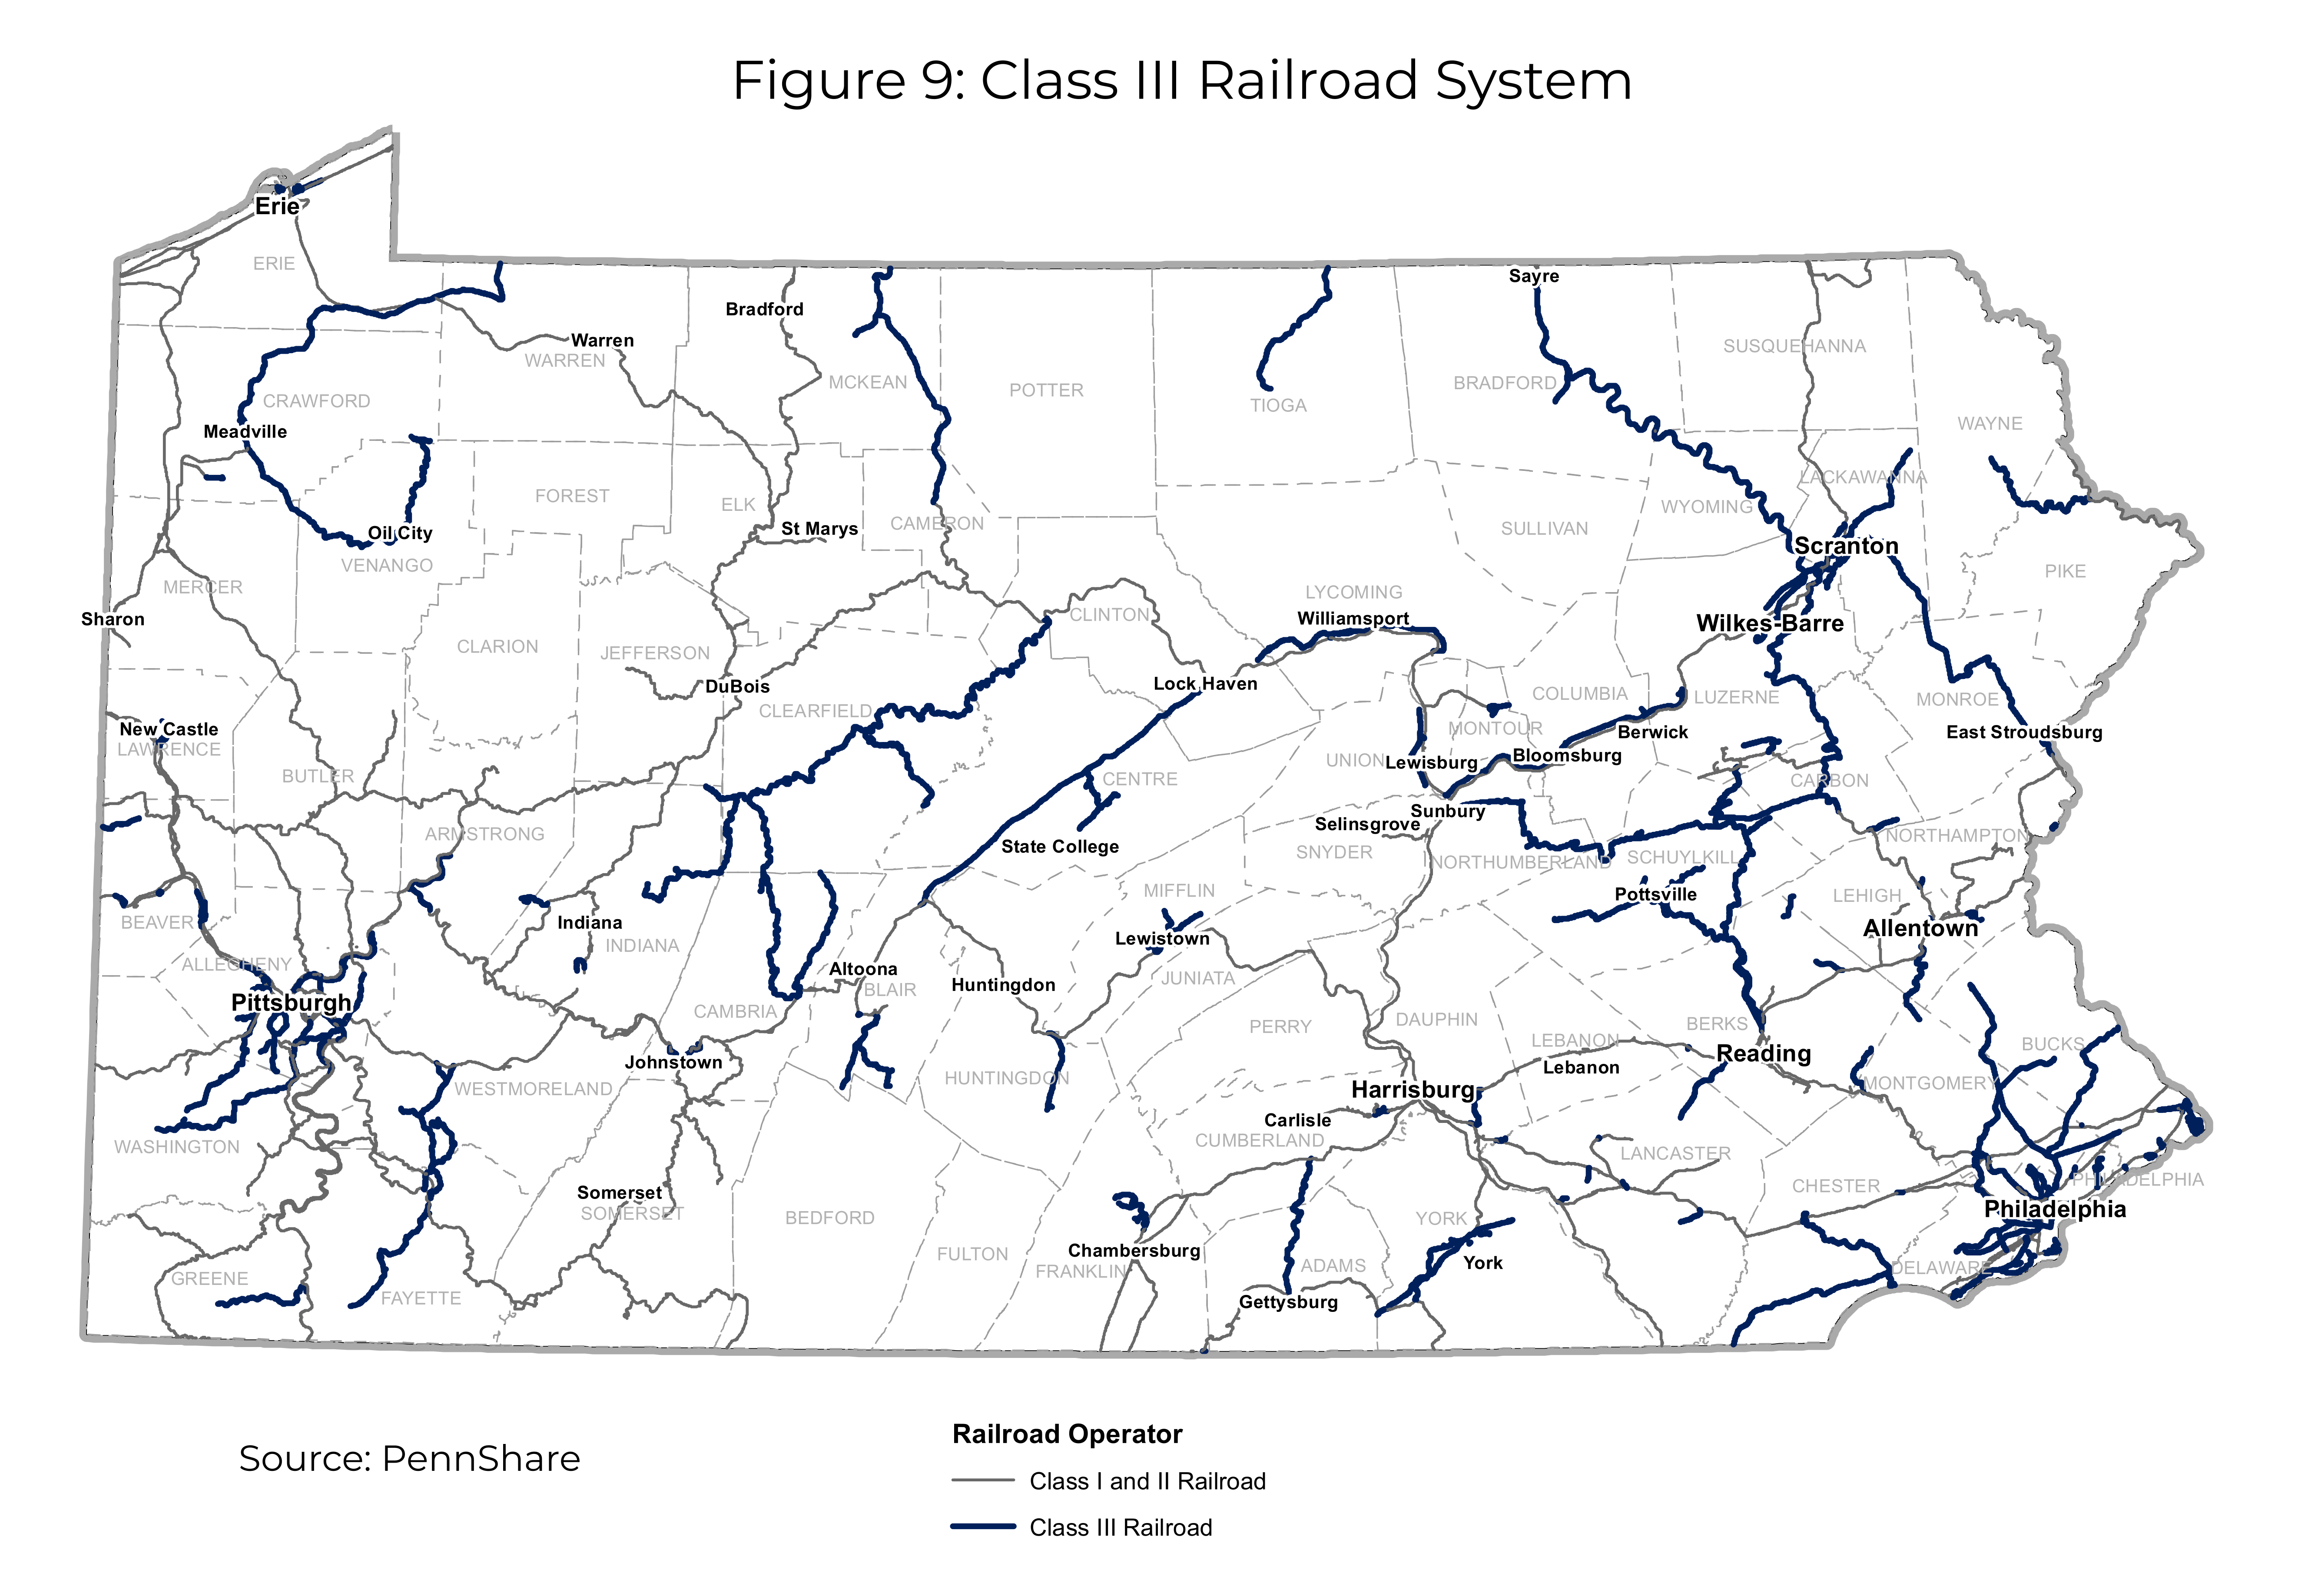 Figure 9 is a state map of Pennsylvania illustrating the state’s Class 3, or short line, railroad network in thick, dark blue lines.